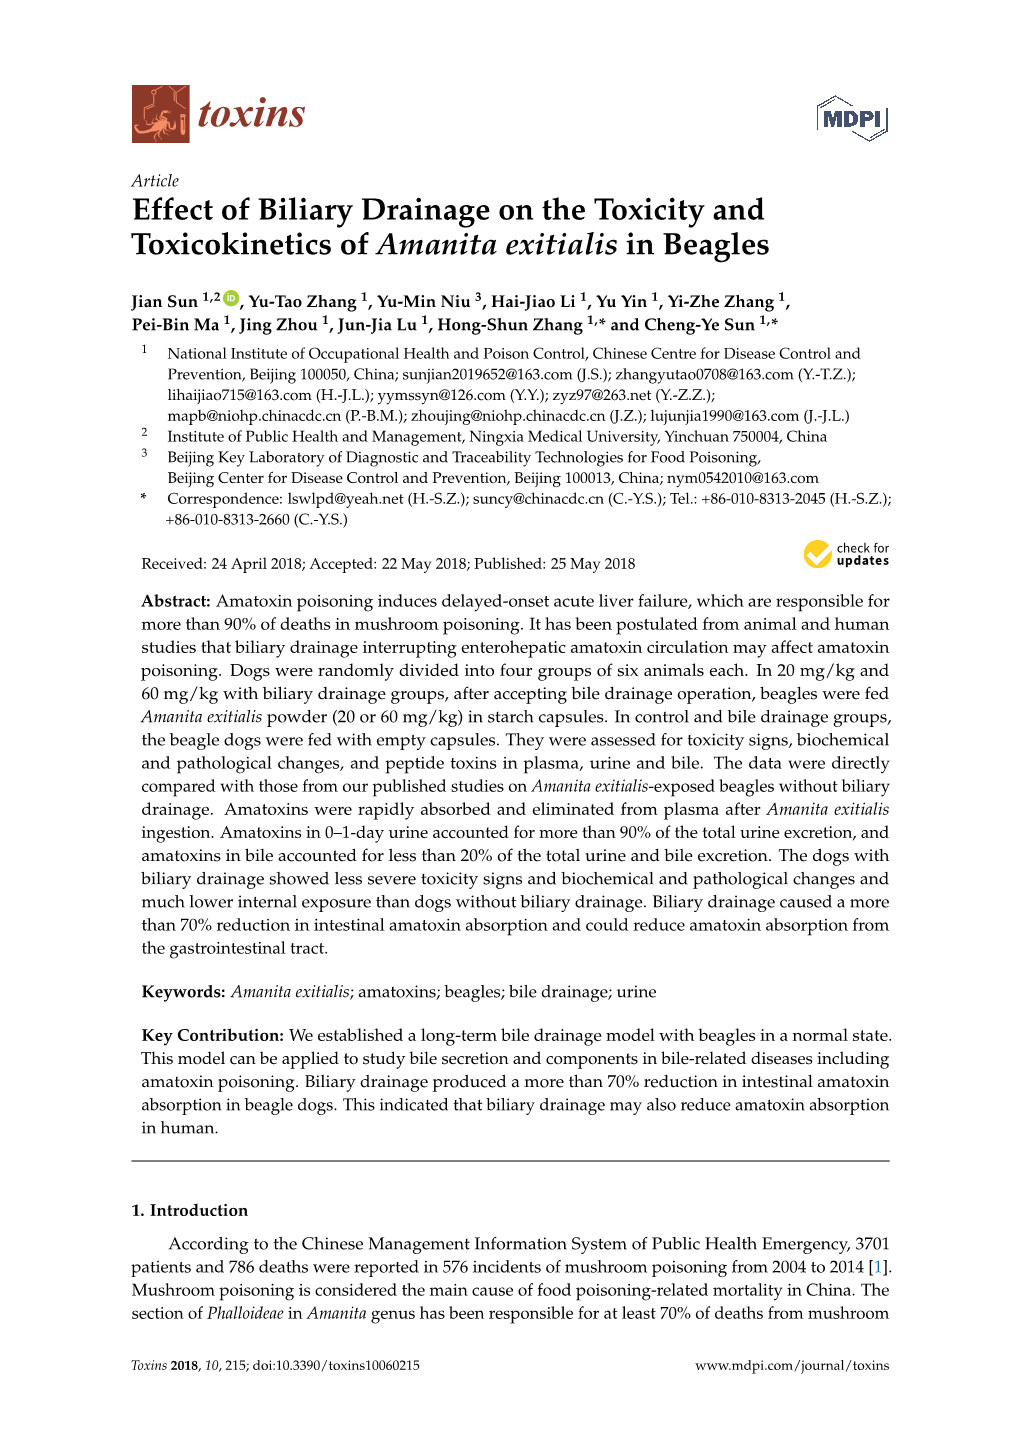 Effect of Biliary Drainage on the Toxicity and Toxicokinetics of Amanita Exitialis in Beagles